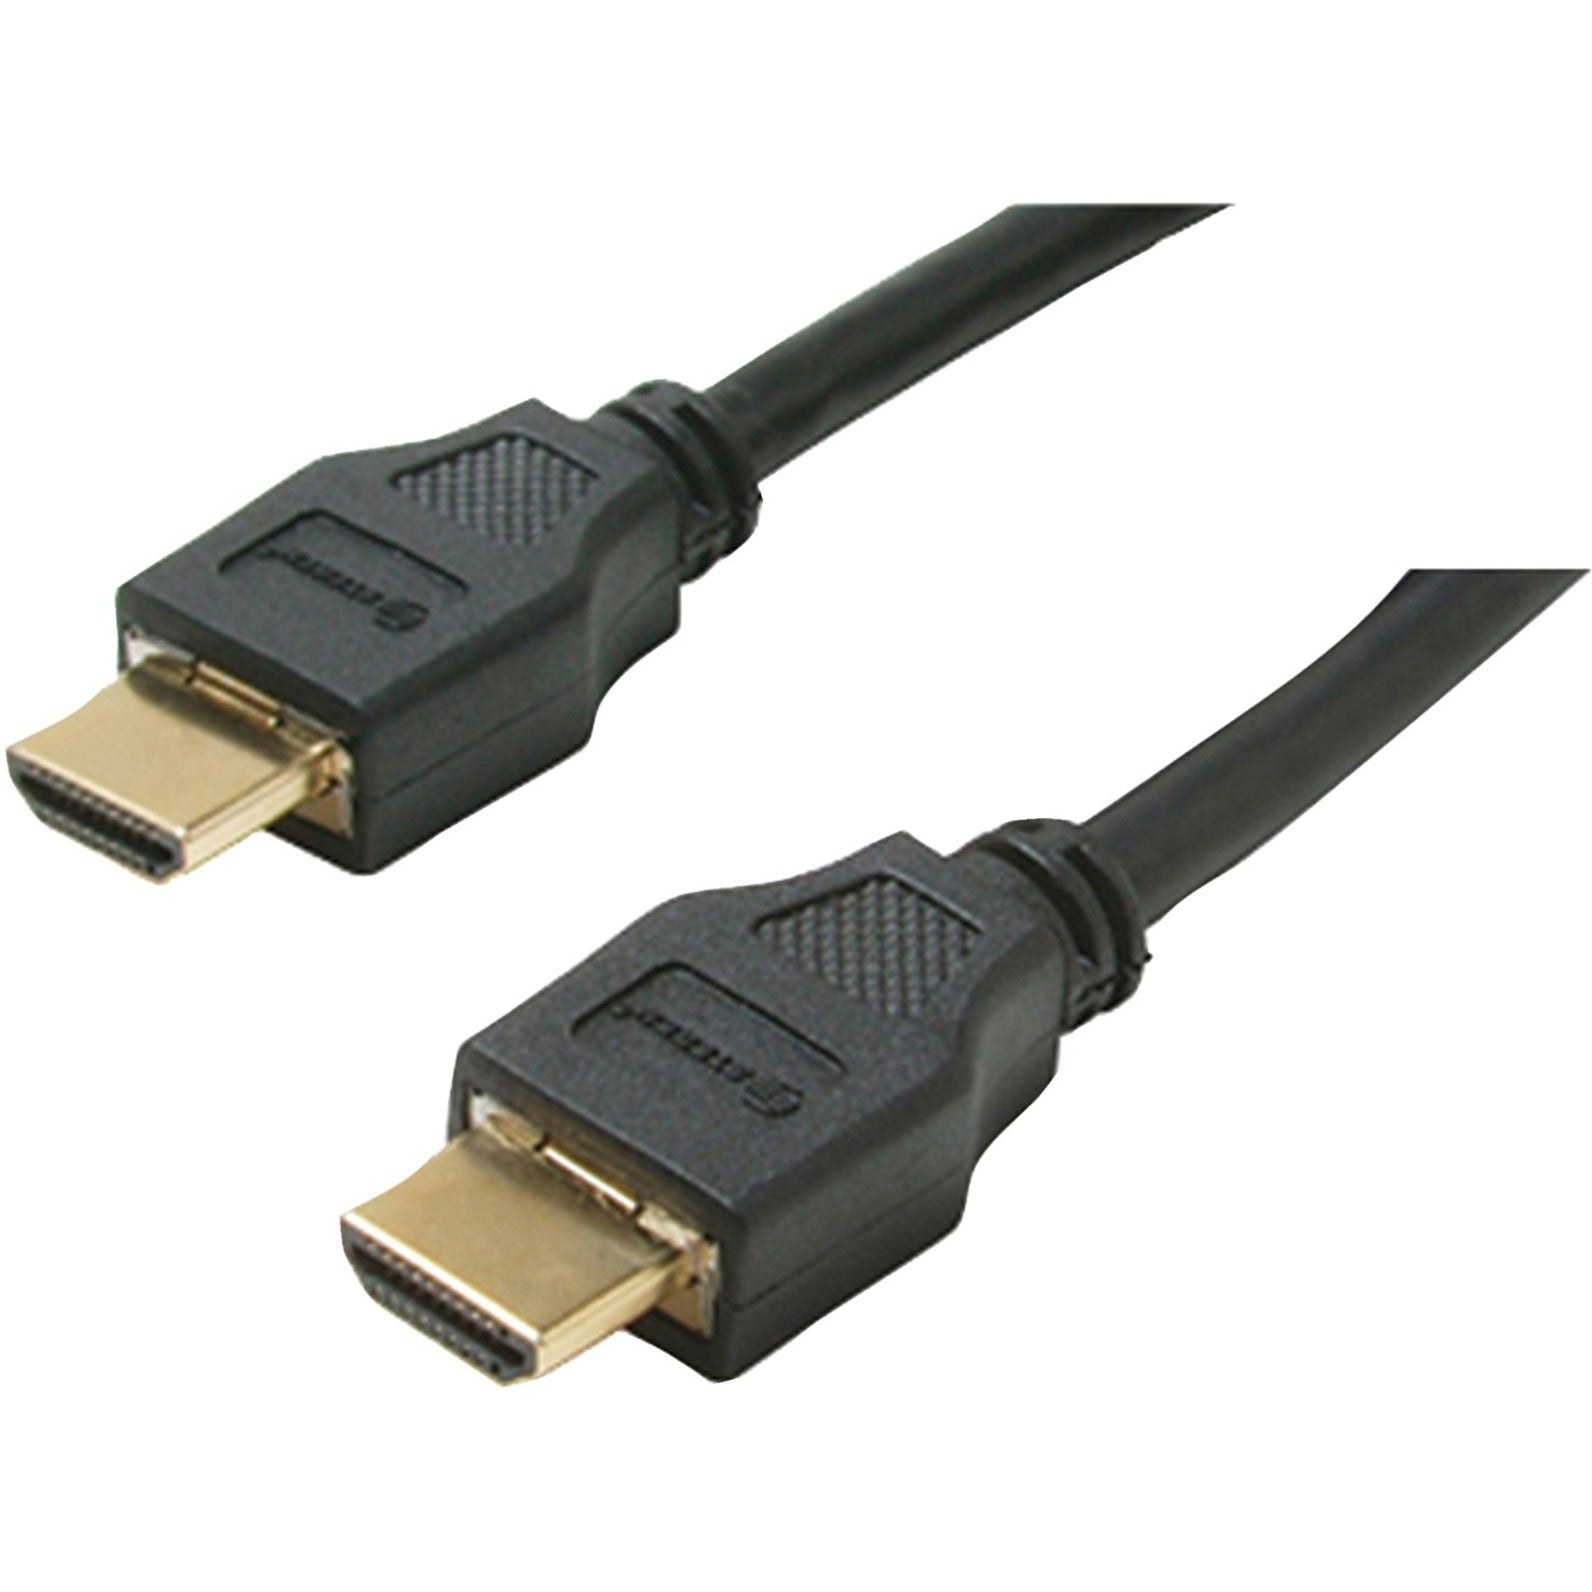 Steren 517-330BK HDMI with Ethernet Audio/Video Cable, 30 ft, Satin Black, UL/CUL Certified, RoHS Compliant